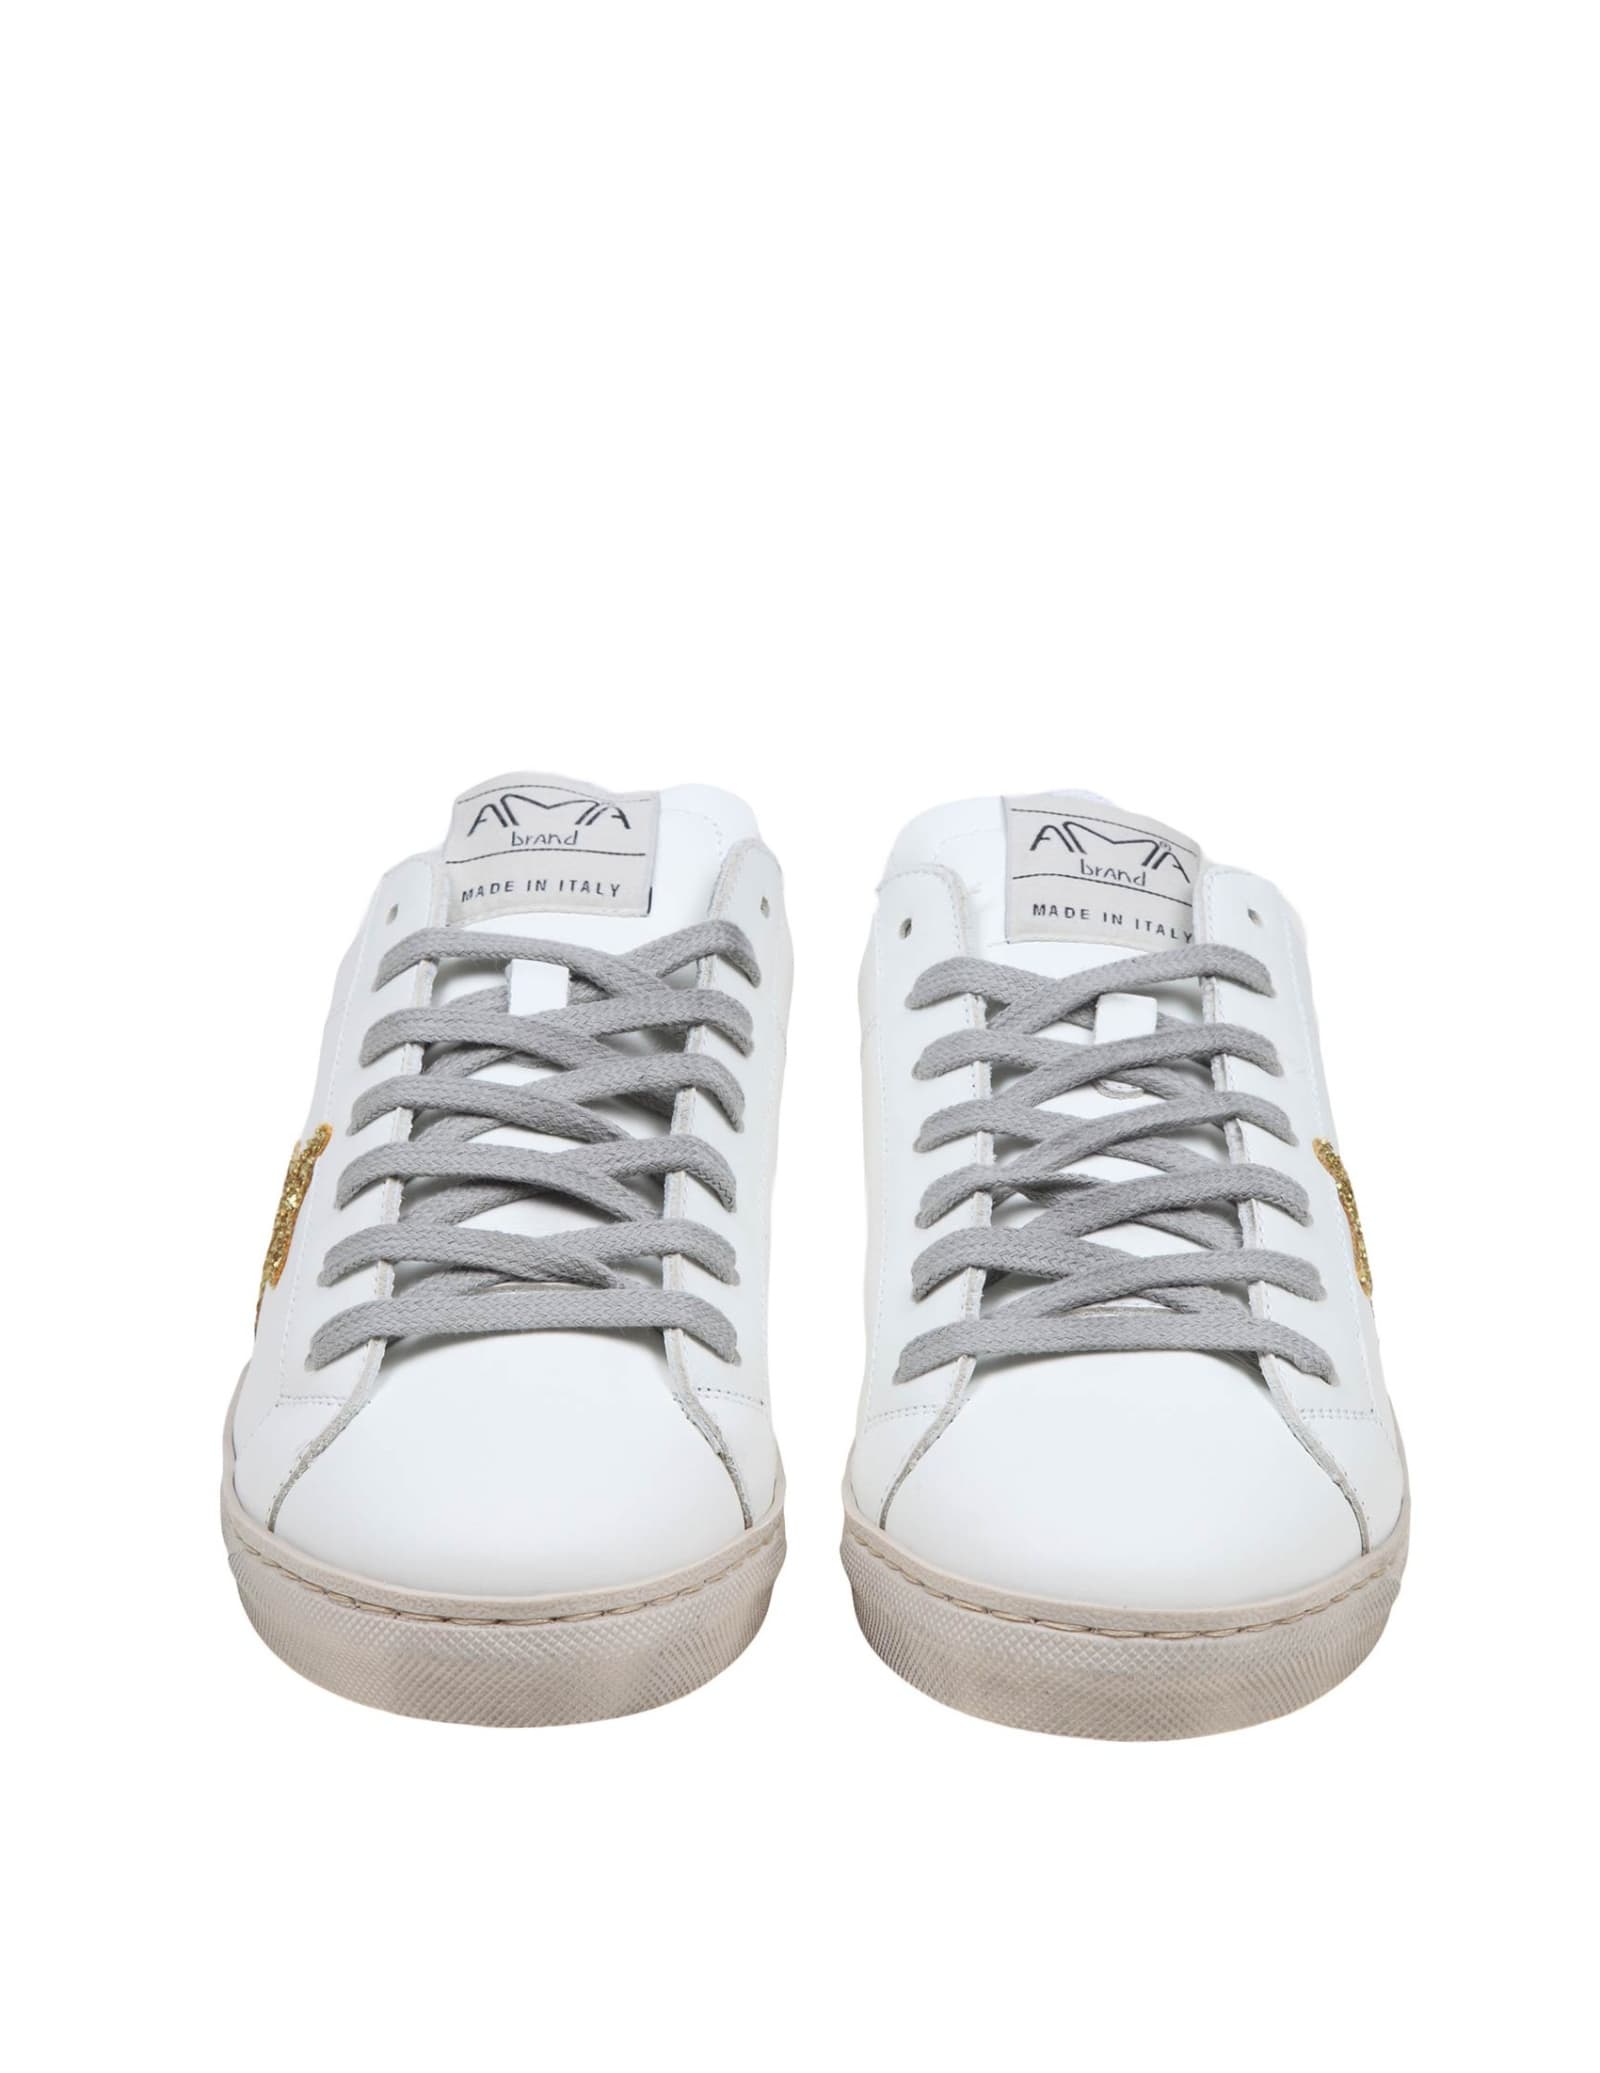 Shop Ama Brand Sneakers In White Leather And Gold Glitter In Bianco/glitter